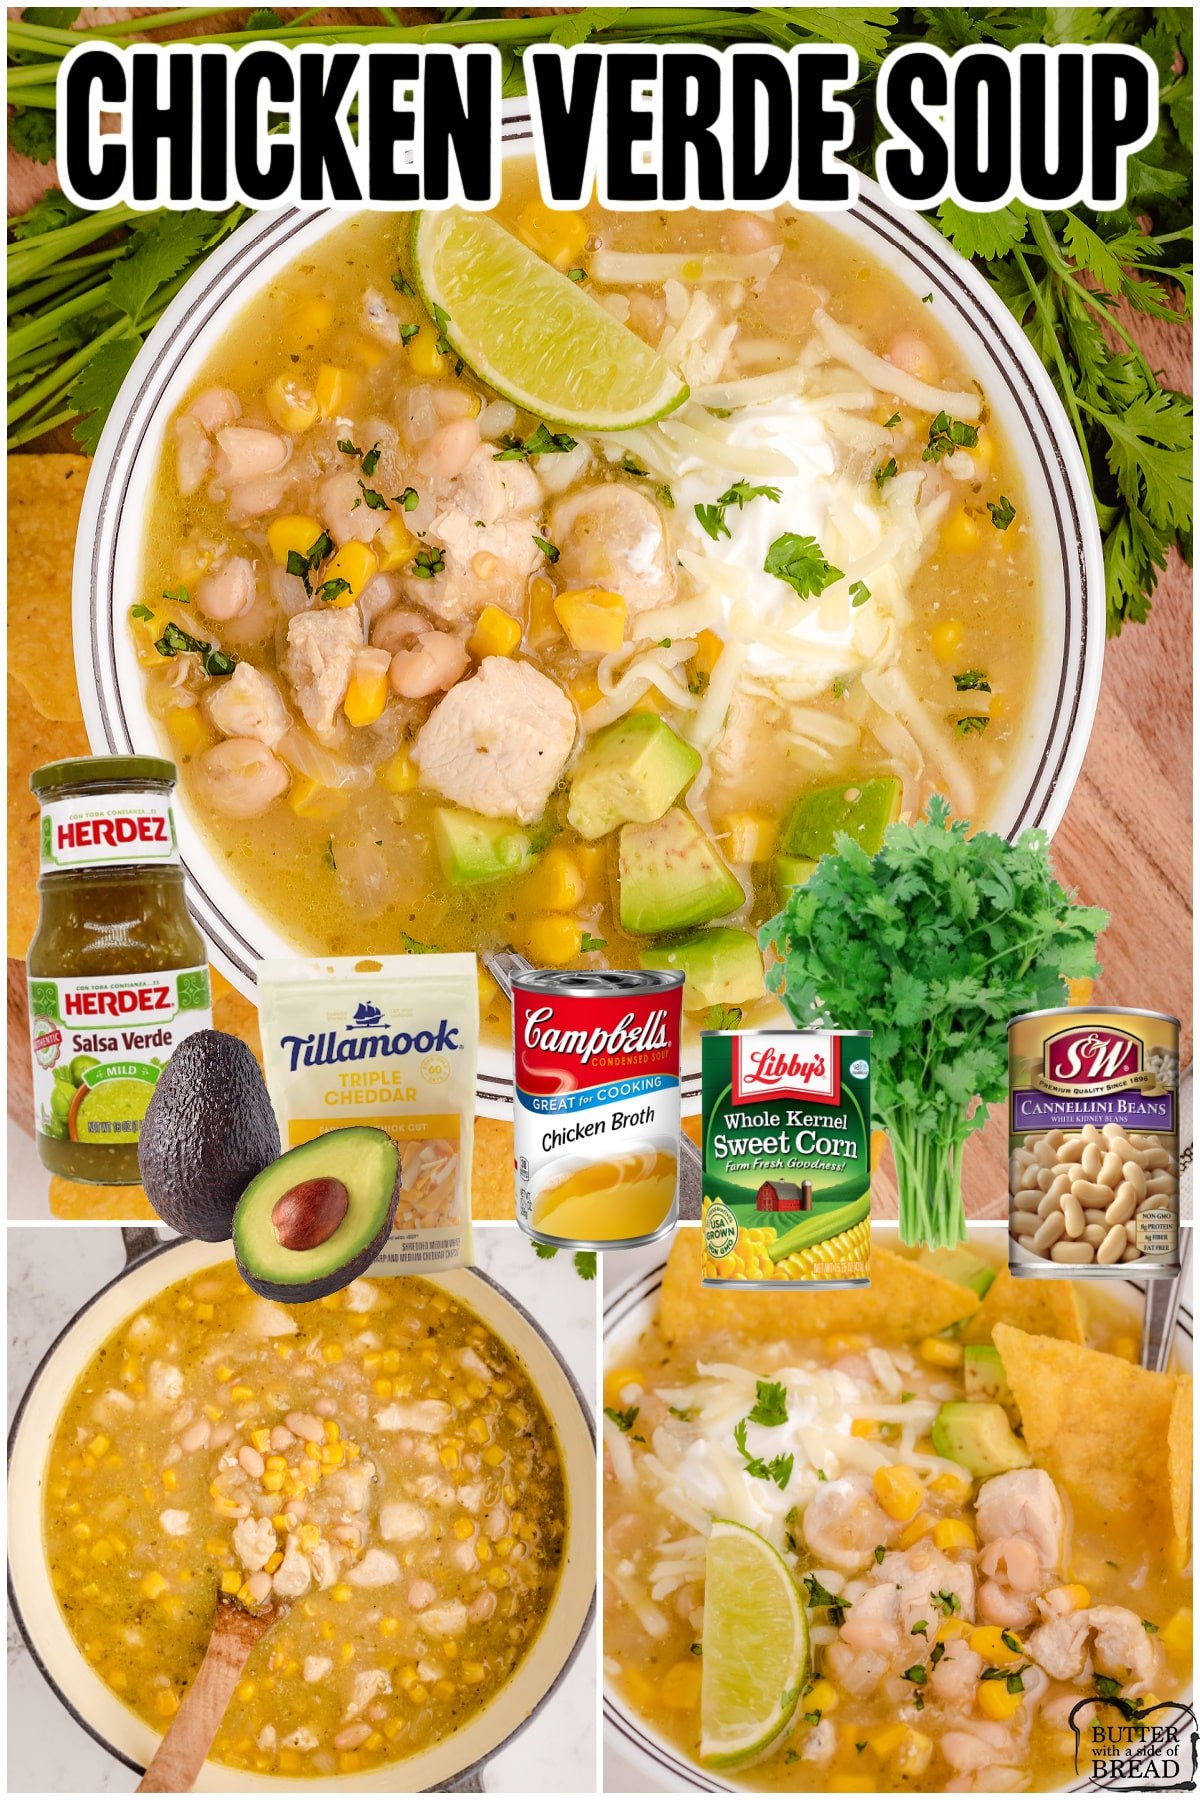 Southwestern Chicken Verde Soup is a flavorful homemade chicken soup made easy in under an hour! Tender chicken, beans, corn & broth all combine with salsa verde for a great Southwestern soup!